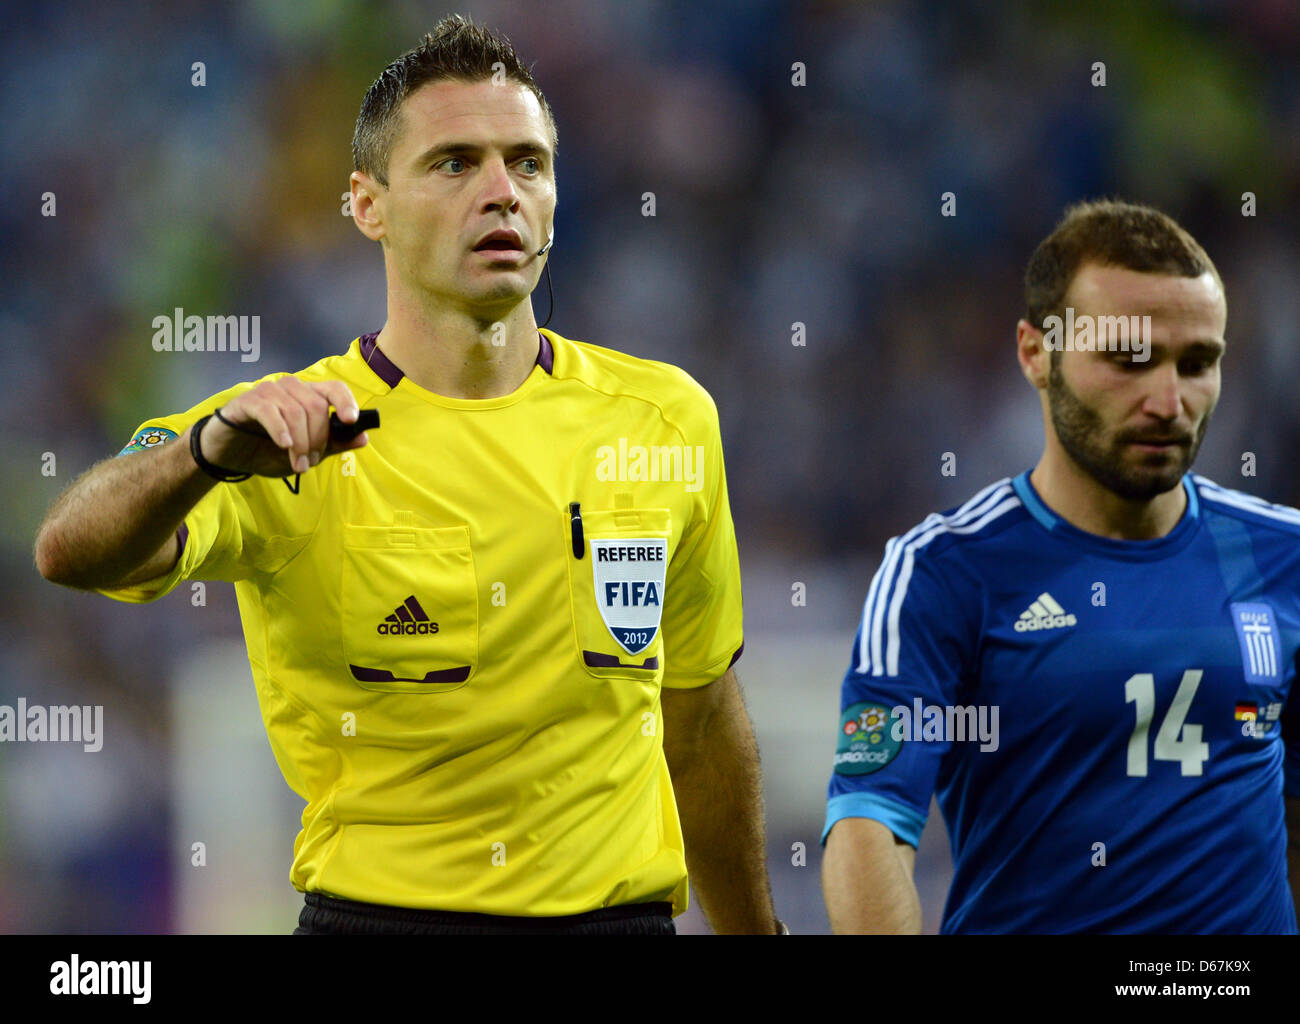 Slovenian referee Damir Skomina (L) gestures next to Greece's Dimitris Salpingidis during UEFA EURO 2012 quarter- final soccer match Germany vs Greece at Arena Gdansk in Gdansk, Poland, 22 June 2012. Photo: Andreas Gebert dpa (Please refer to chapters 7 and 8 of http://dpaq.de/Ziovh for UEFA Euro 2012 Terms & Conditions)  +++(c) dpa - Bildfunk+++ Stock Photo